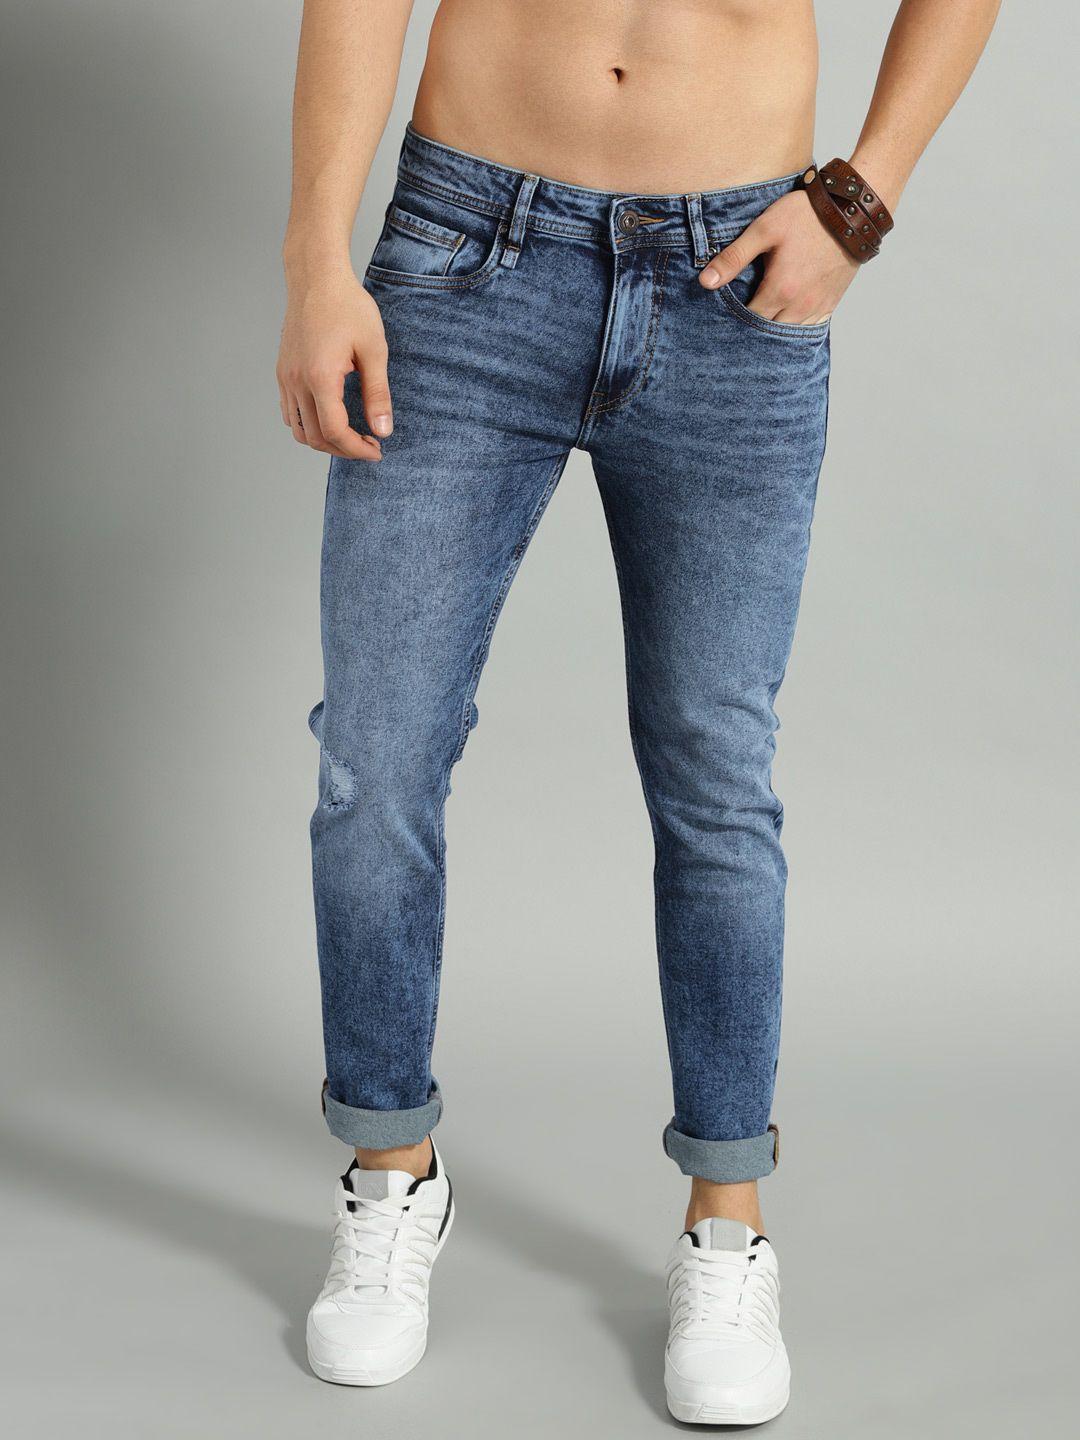 roadster-men-blue-skinny-fit-mid-rise-stretchable-jeans